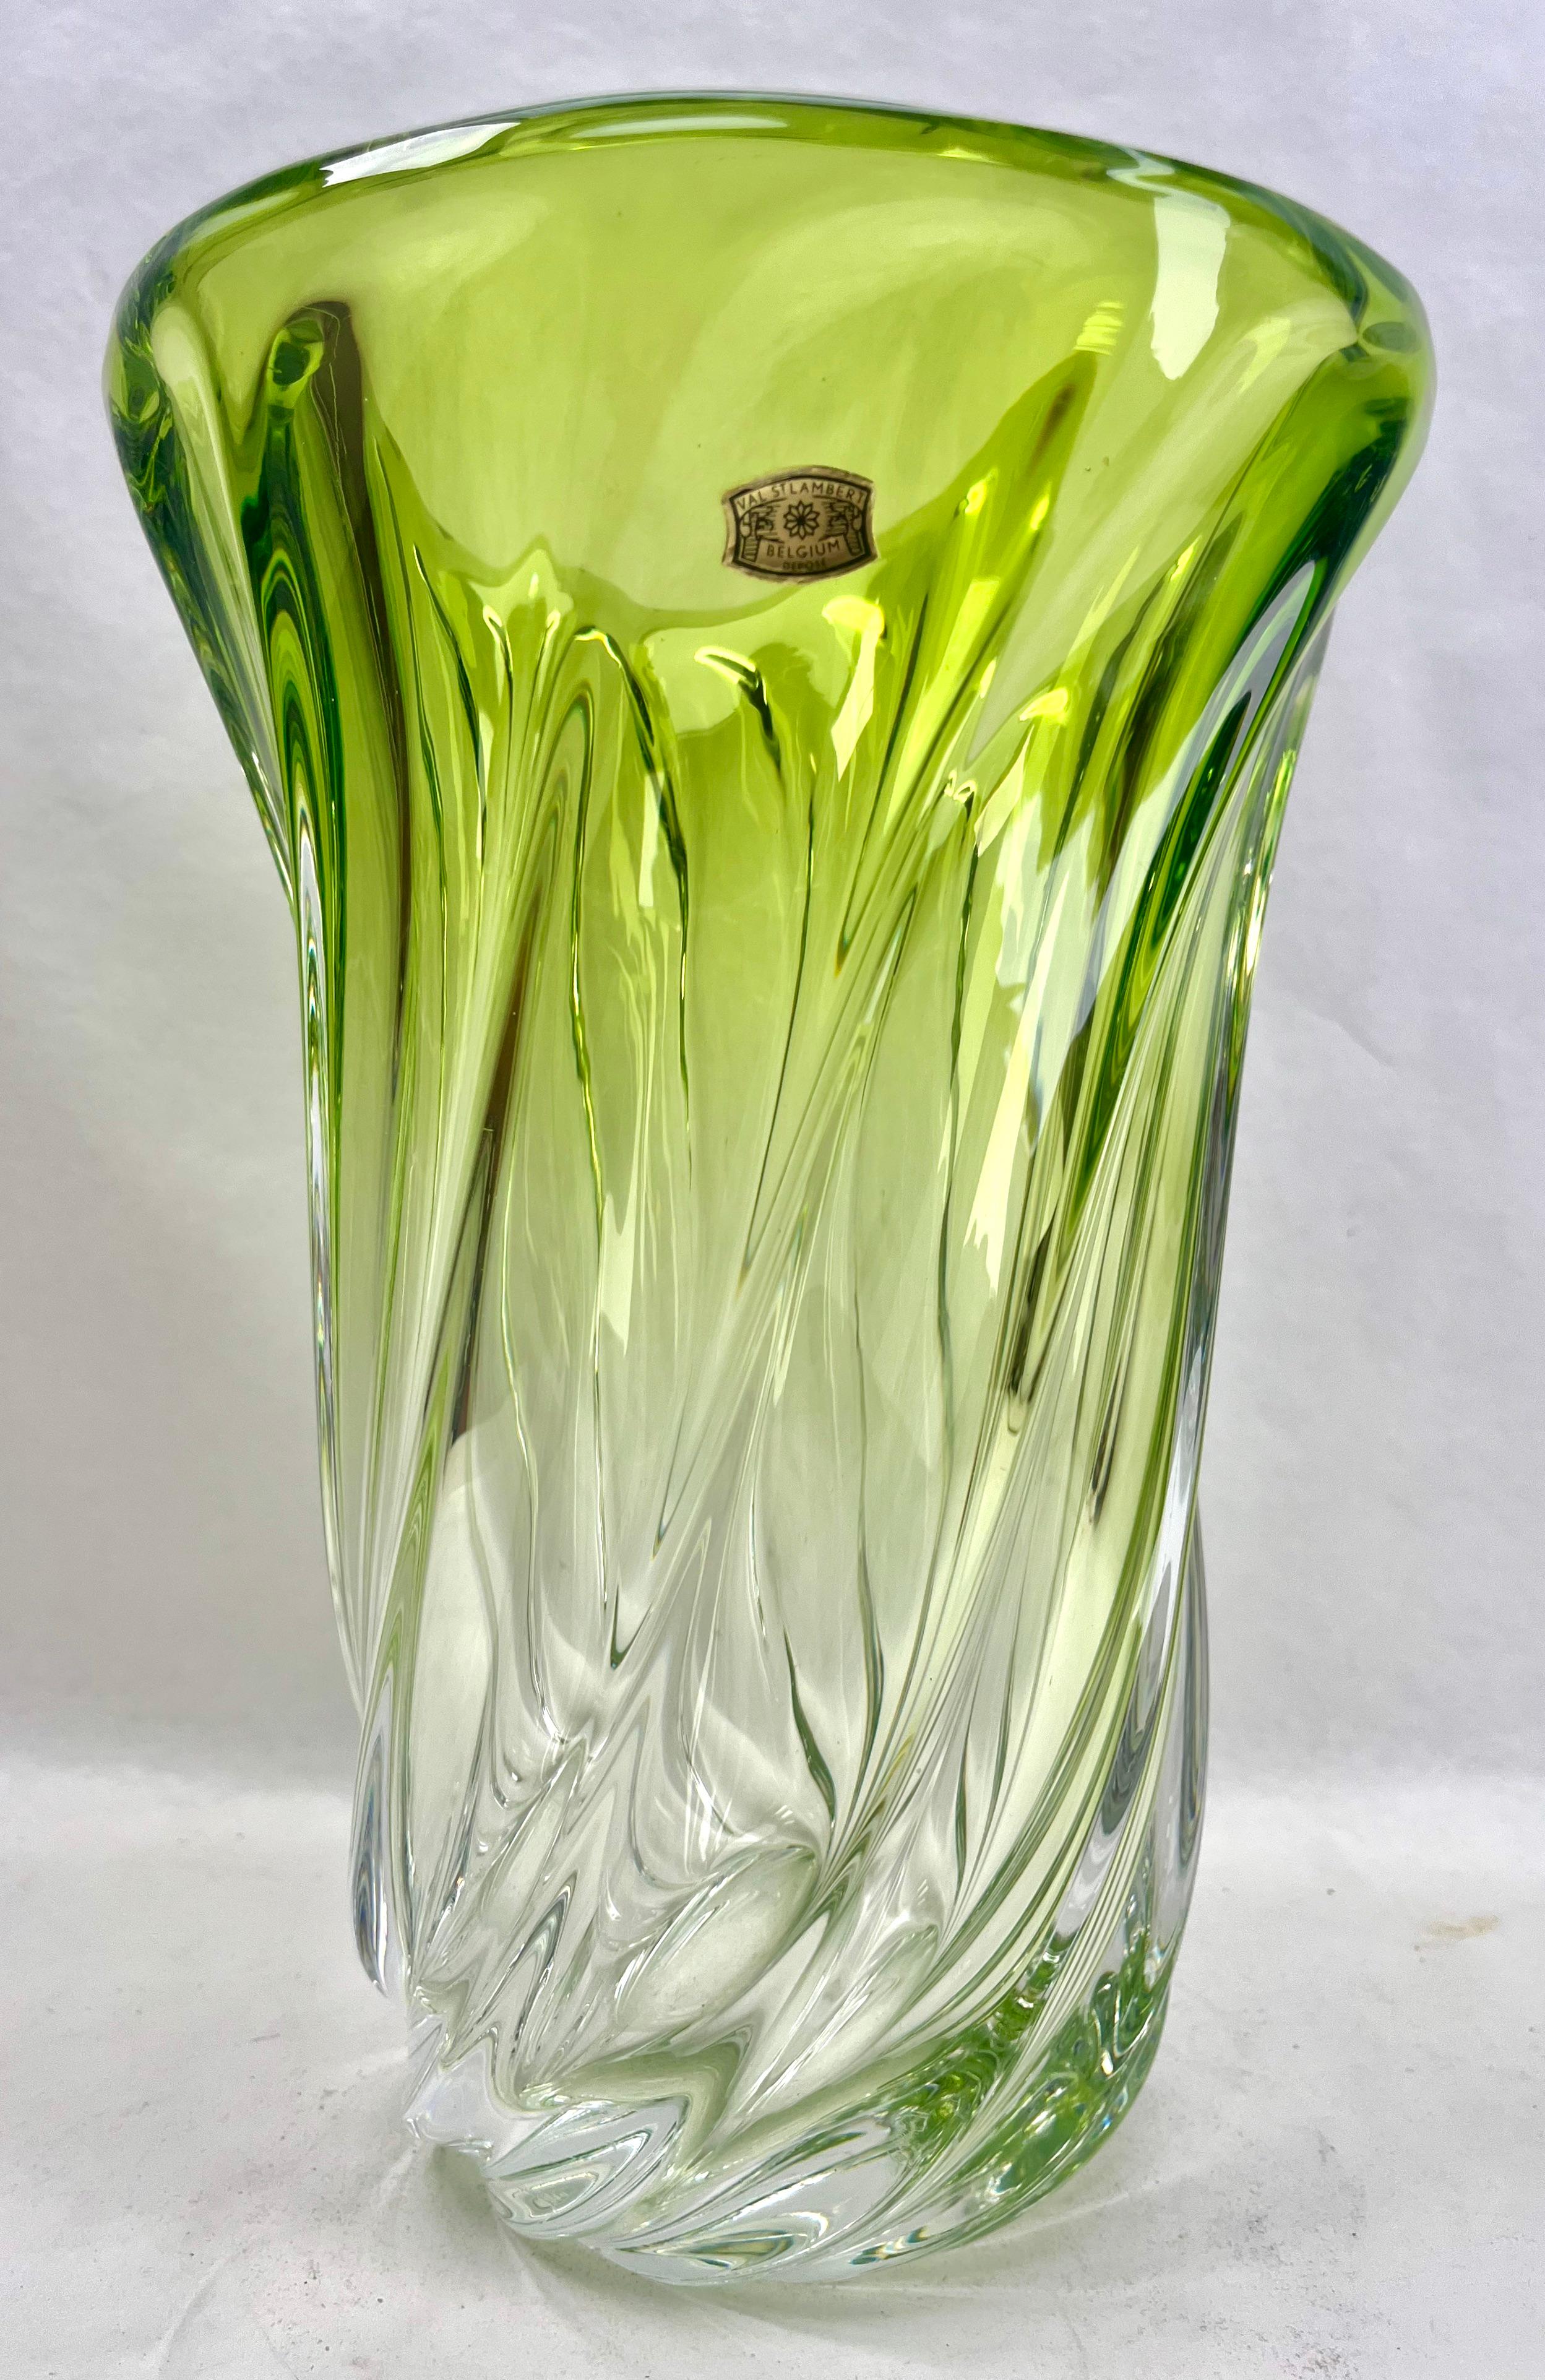 Val Saint Lambert, LABEL  sculpted crystal vase with Green core, Belgium.

Heavy Val Saint Lambert crystal vase catalogued in the 1950s.
The central amethyst color (a traditional favorite for VSL) has been given a thick Sommerso (clear layer on the